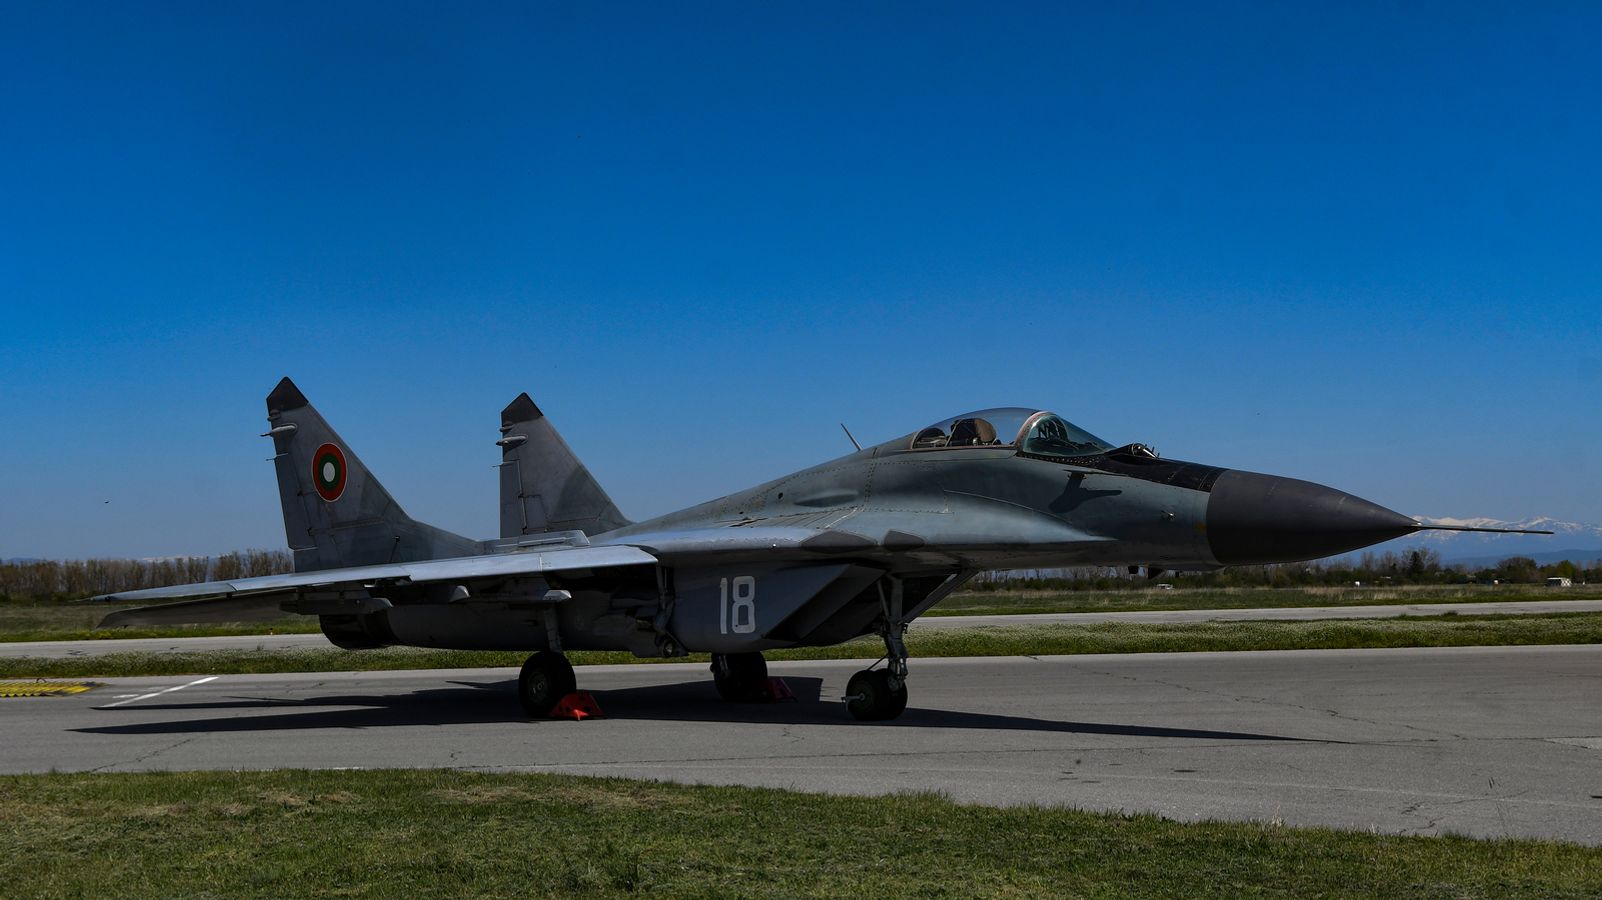 Slovakia wants to deliver fighter jets to Ukraine